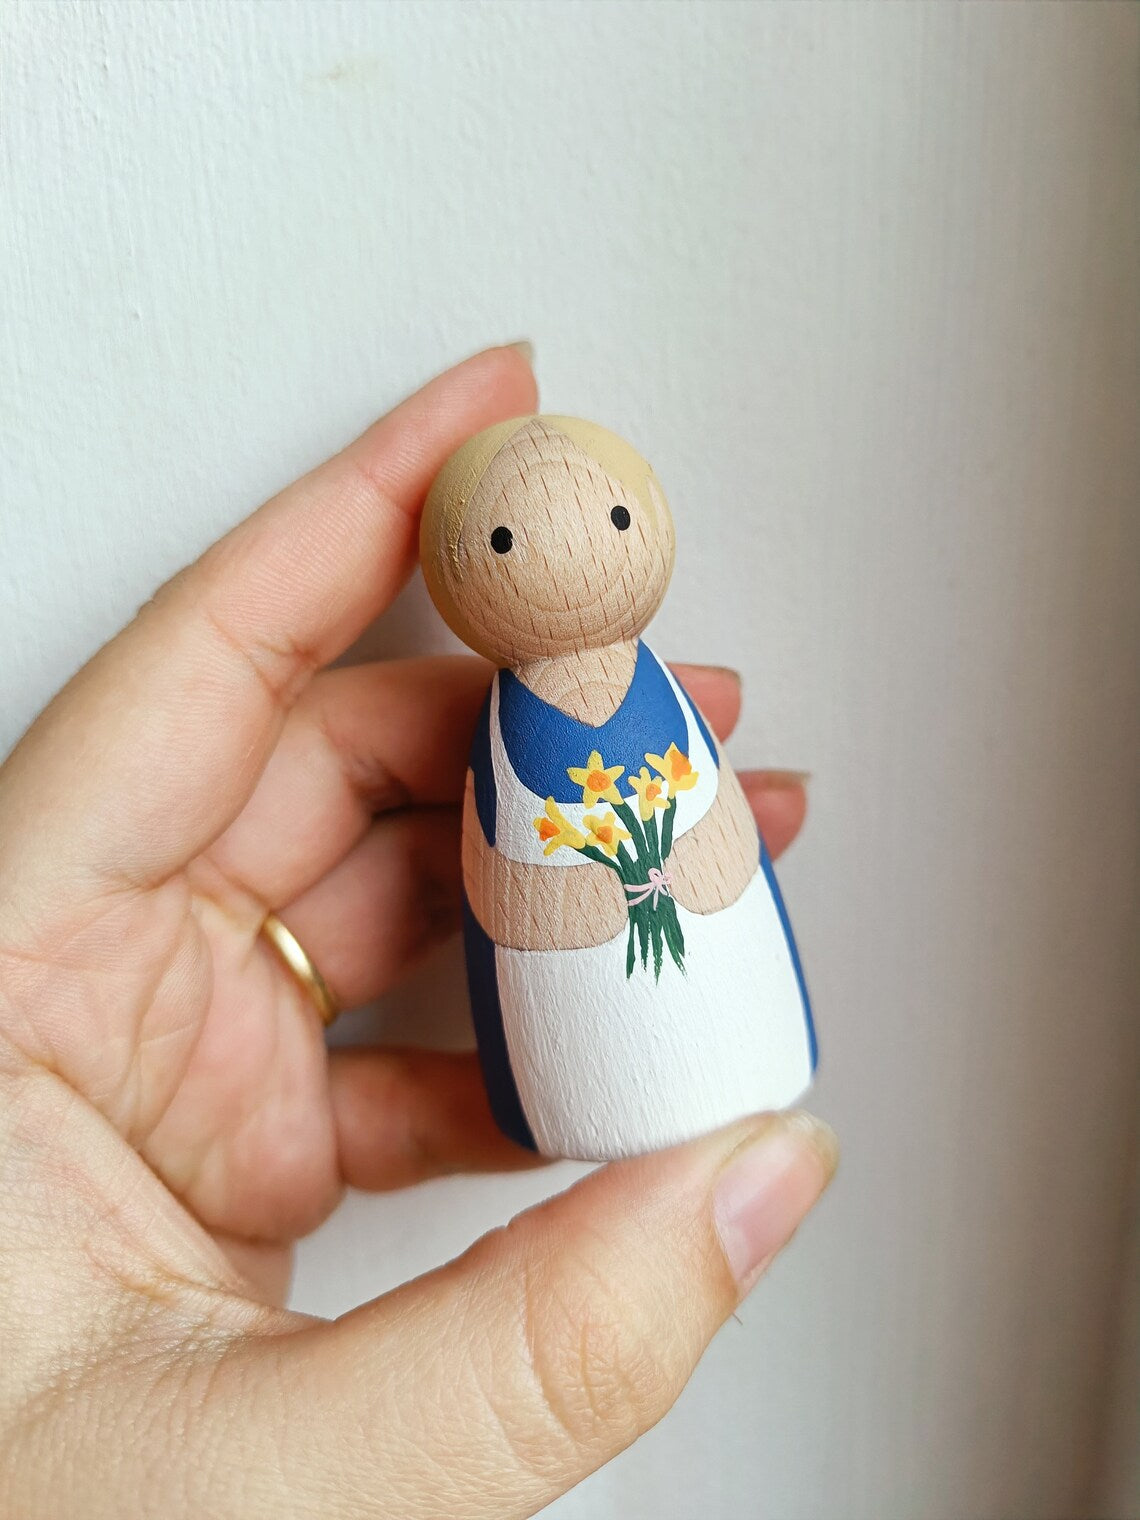 Personalised Mother's Day peg doll gift, Mother's day present from kids, gifts for Mum/Nana/Grandma/Nanny, first mother's day